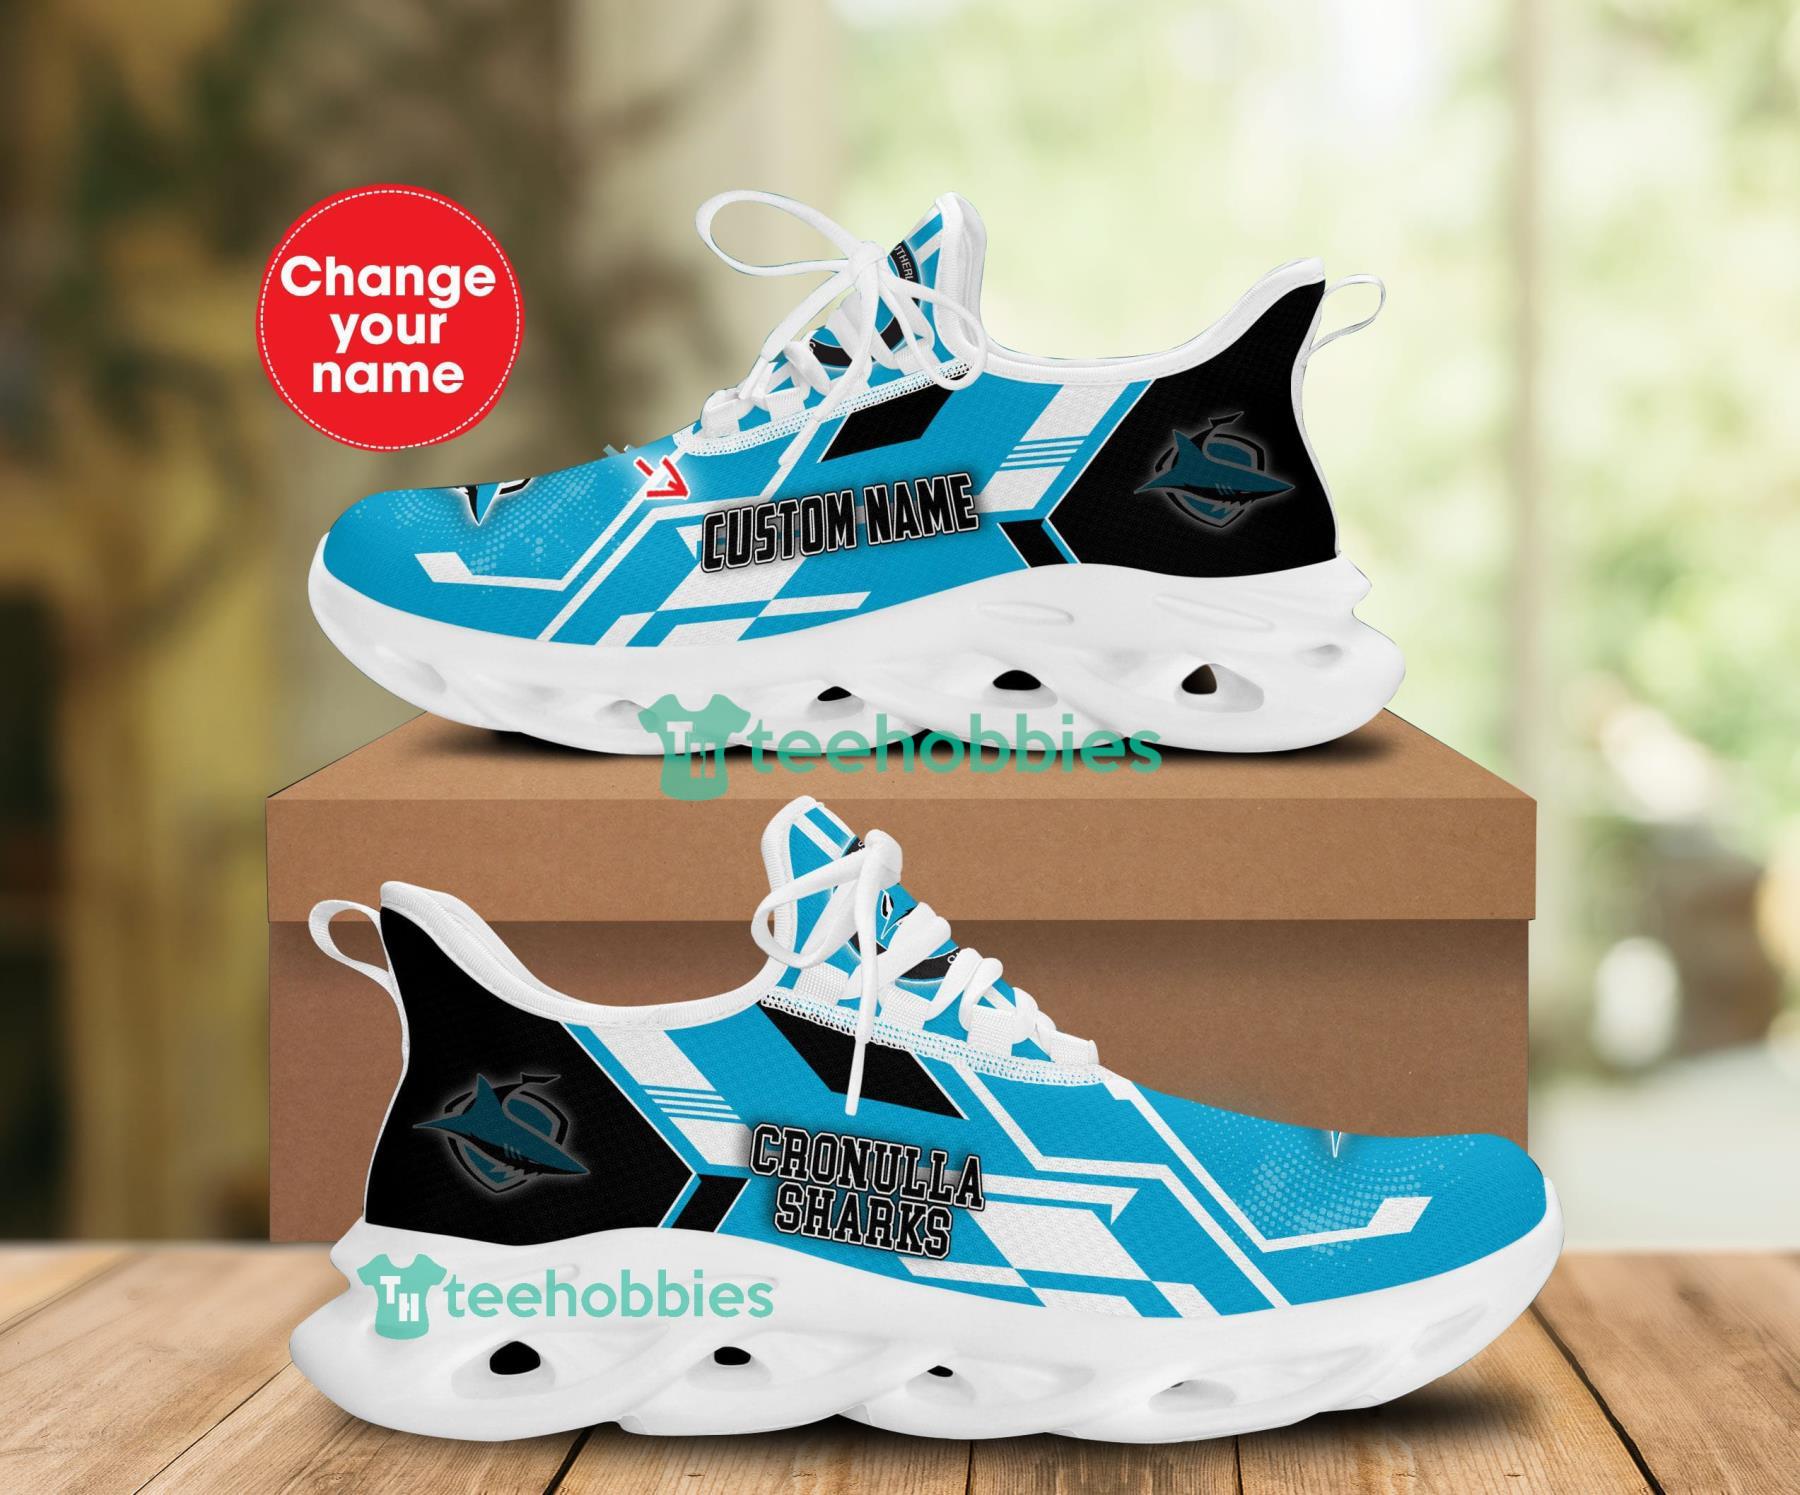 Custom Name Cronulla-Sutherland Sharks Sneakers Max Soul Shoes For Men And Women Product Photo 1